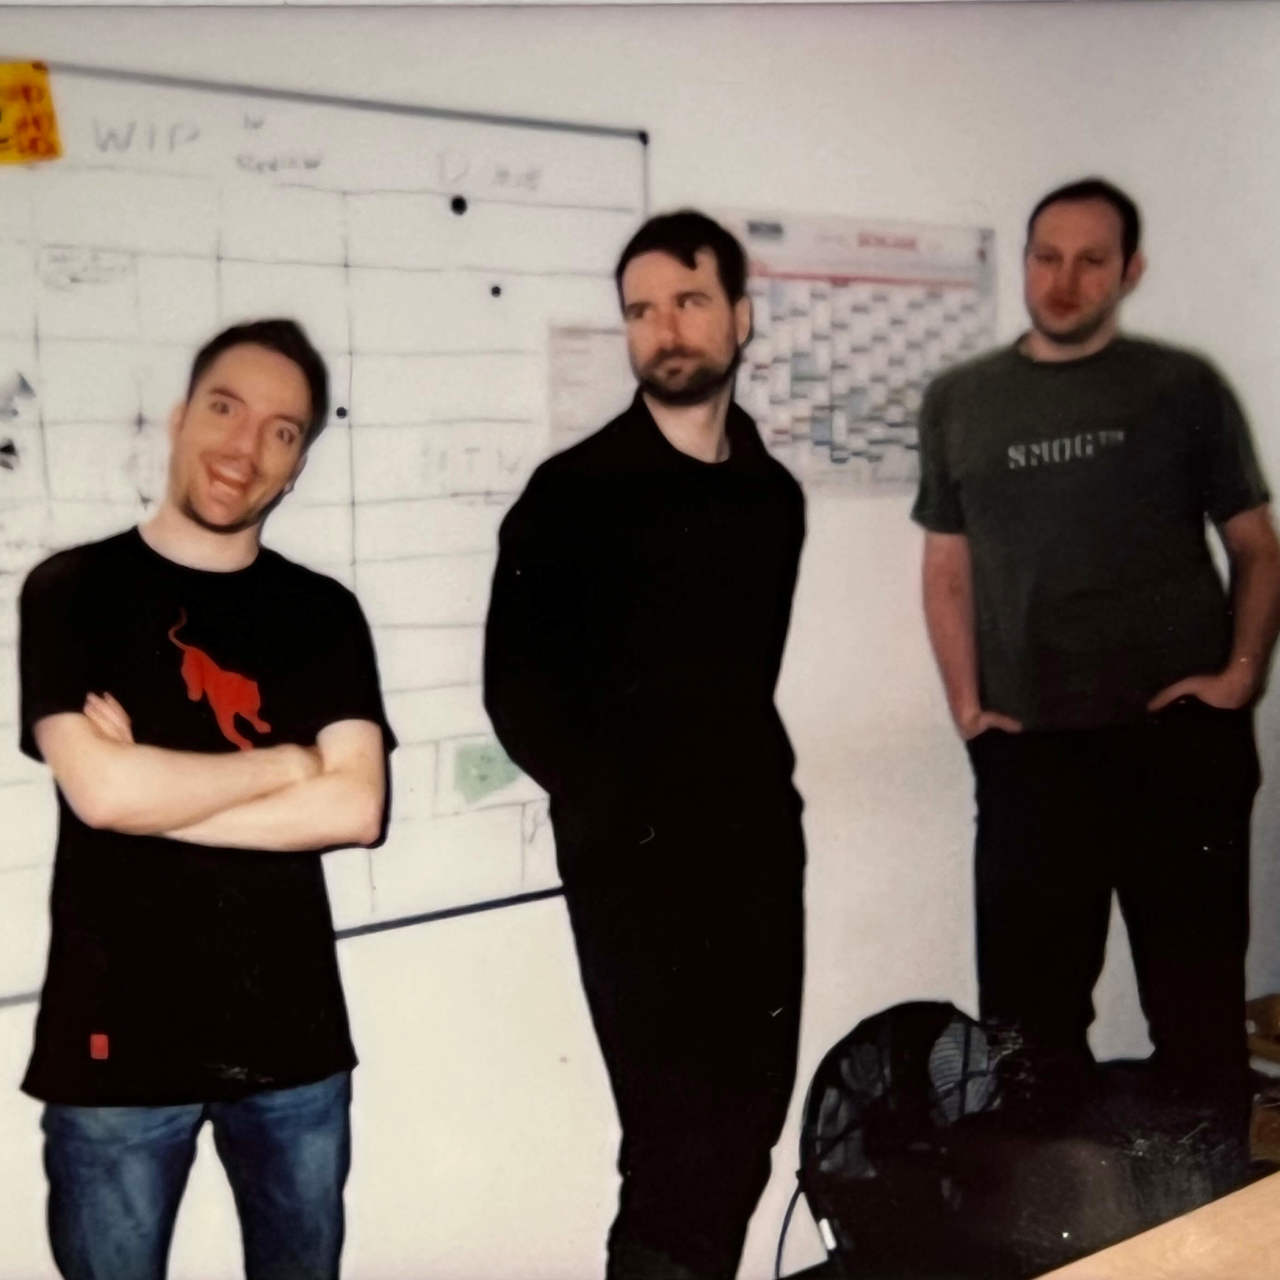 Three Keen employees standing in front of a whiteboard